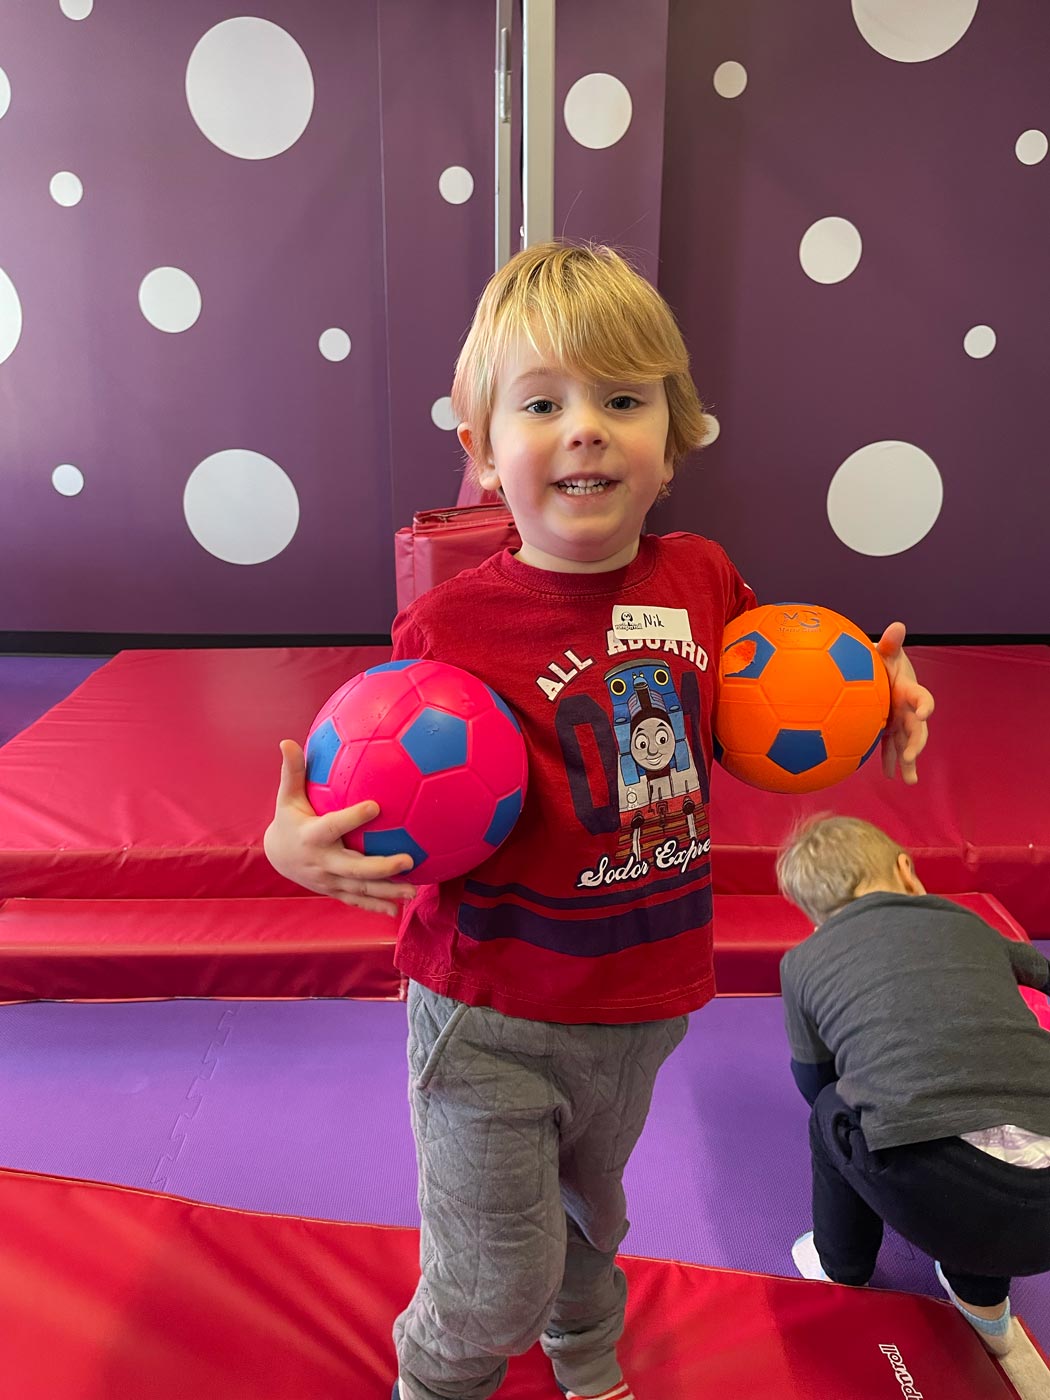 A boy playing with soccer balls in Romp n' Roll Pittsburgh's gym.